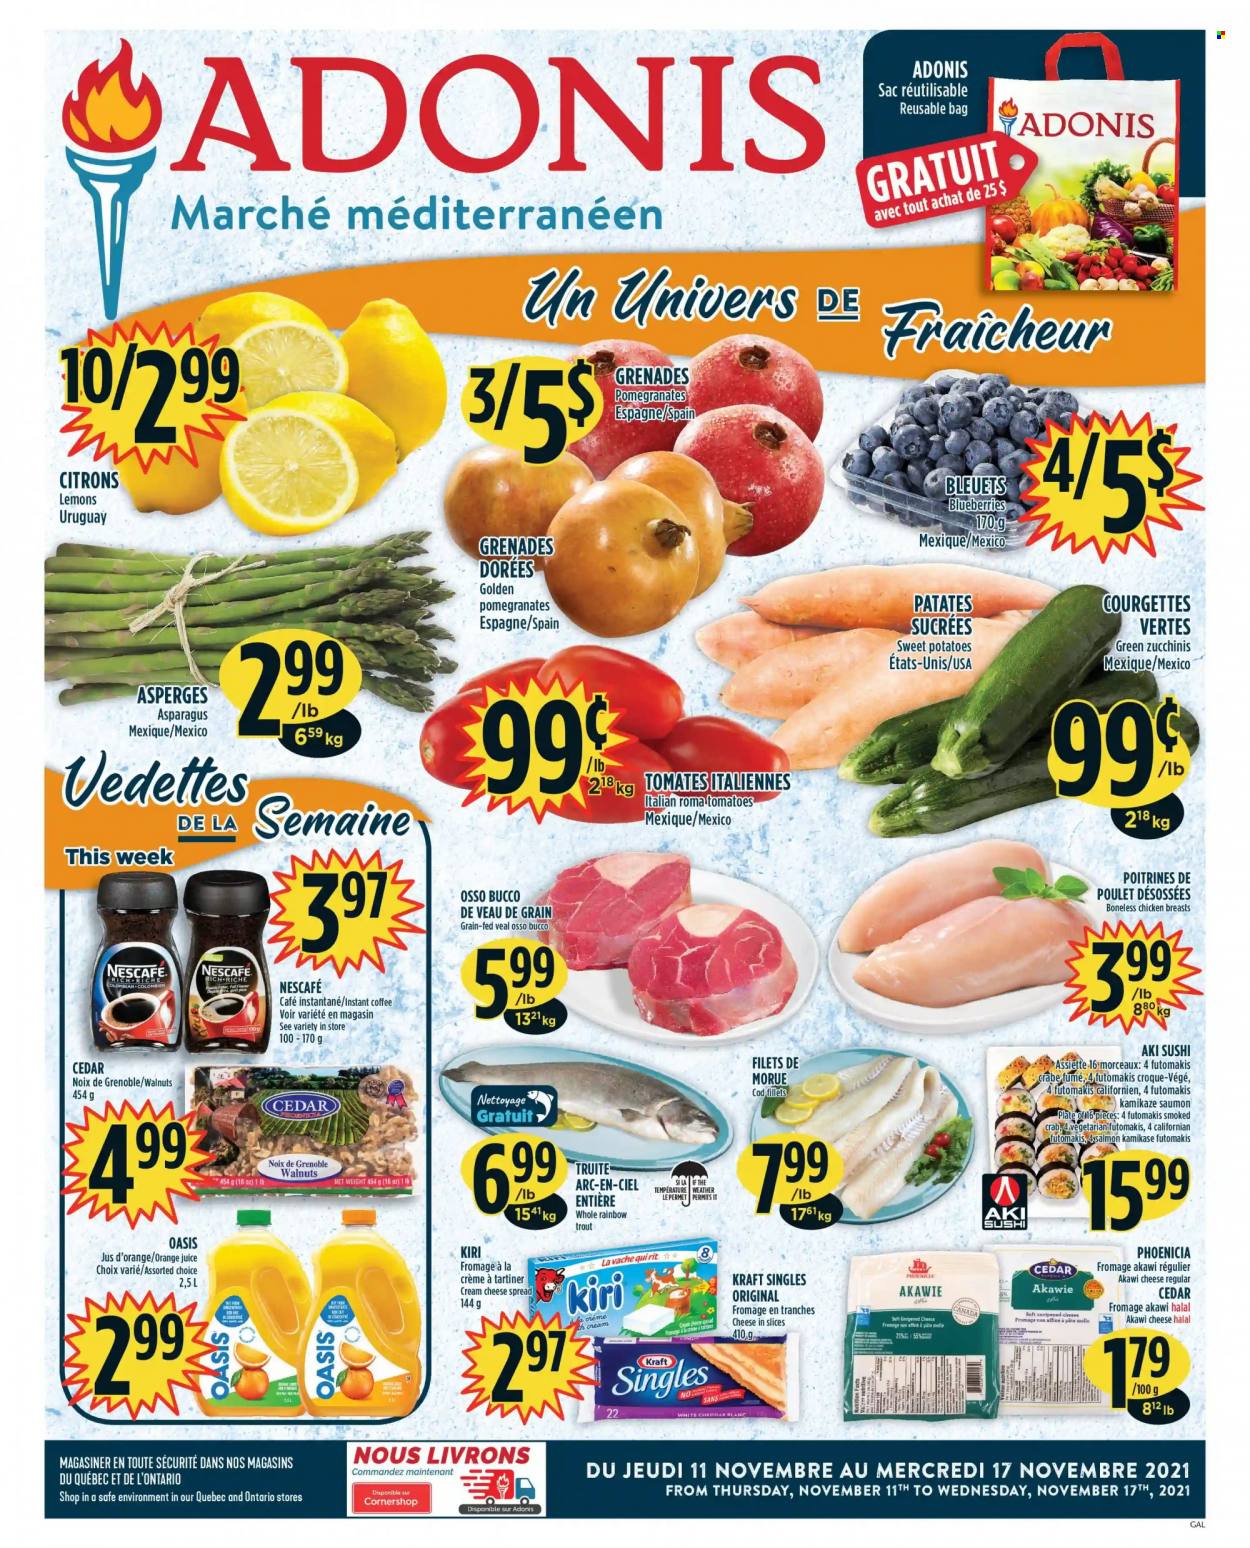 thumbnail - Adonis Flyer - November 11, 2021 - November 17, 2021 - Sales products - asparagus, sweet potato, tomatoes, potatoes, blueberries, pomegranate, lemons, cod, trout, crab, Kraft®, cheese spread, cream cheese, sandwich slices, cheddar, Kiri, The Laughing Cow, Kraft Singles, walnuts, orange juice, juice, instant coffee, chicken breasts, Nescafé. Page 1.